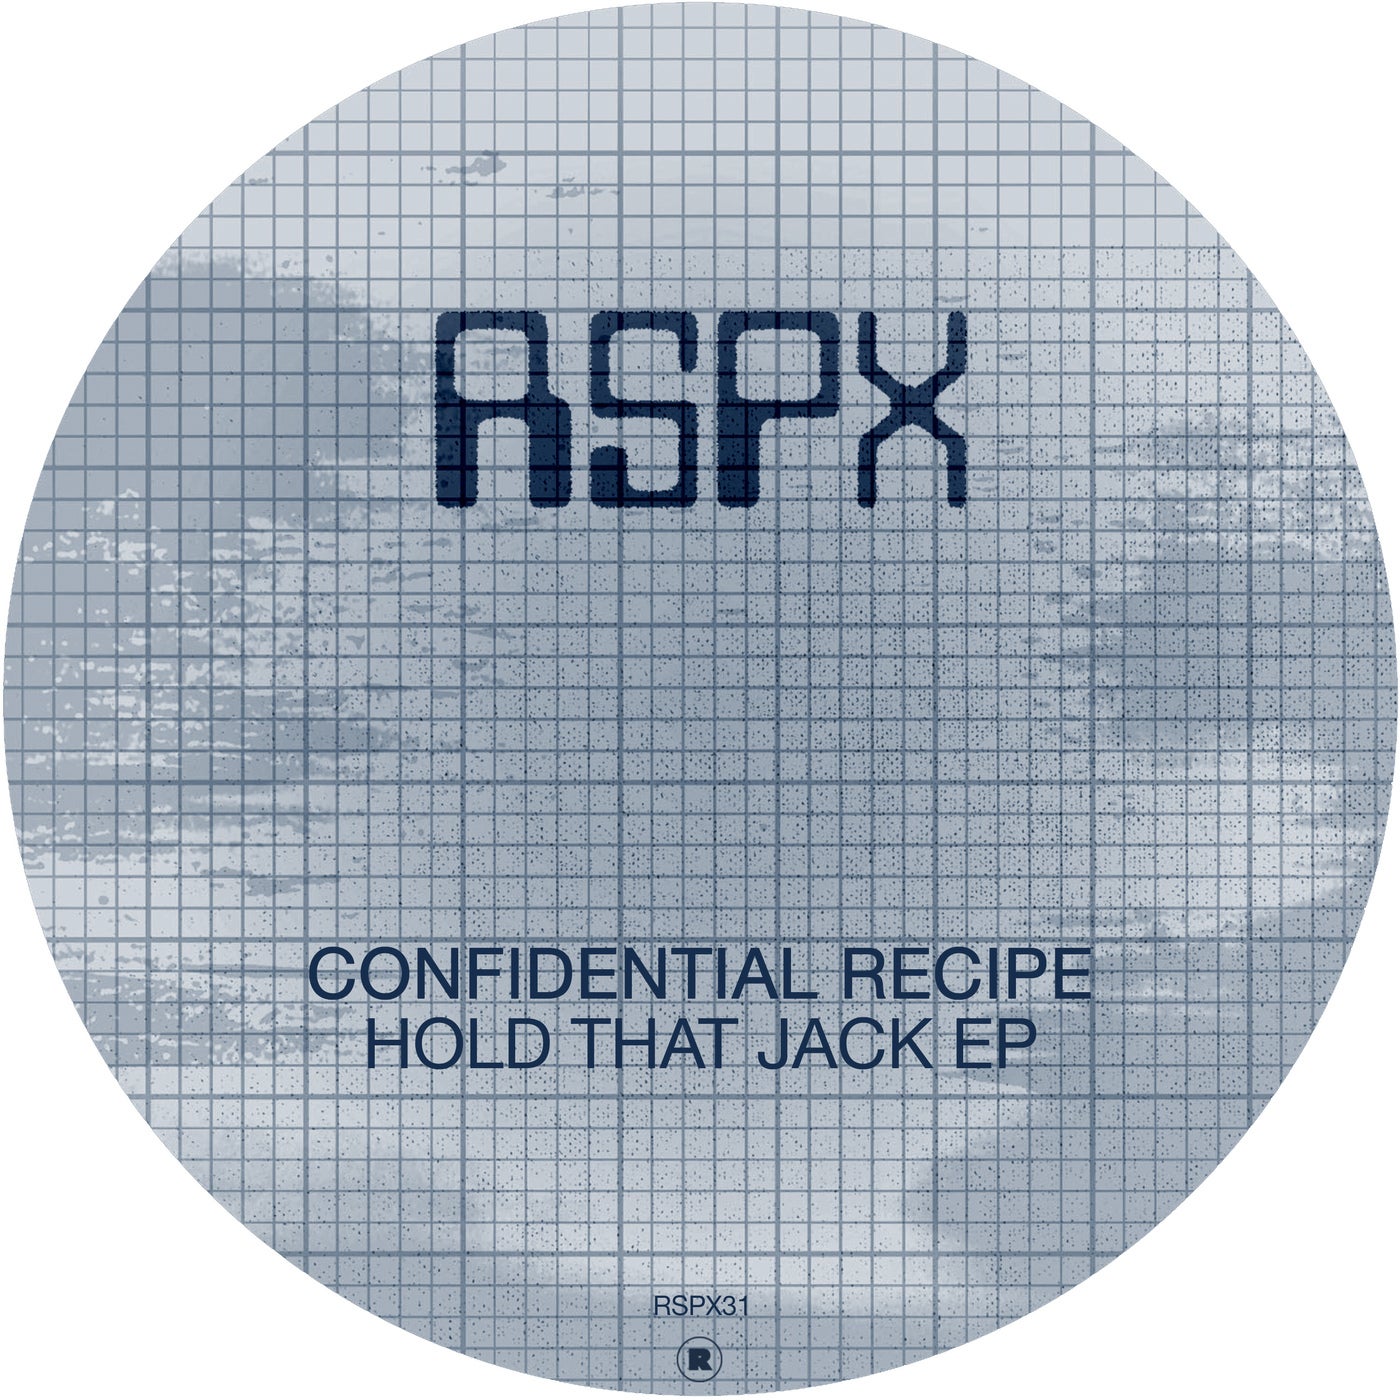 Confidential Recipe – Hold That Jack EP [RSPX31]